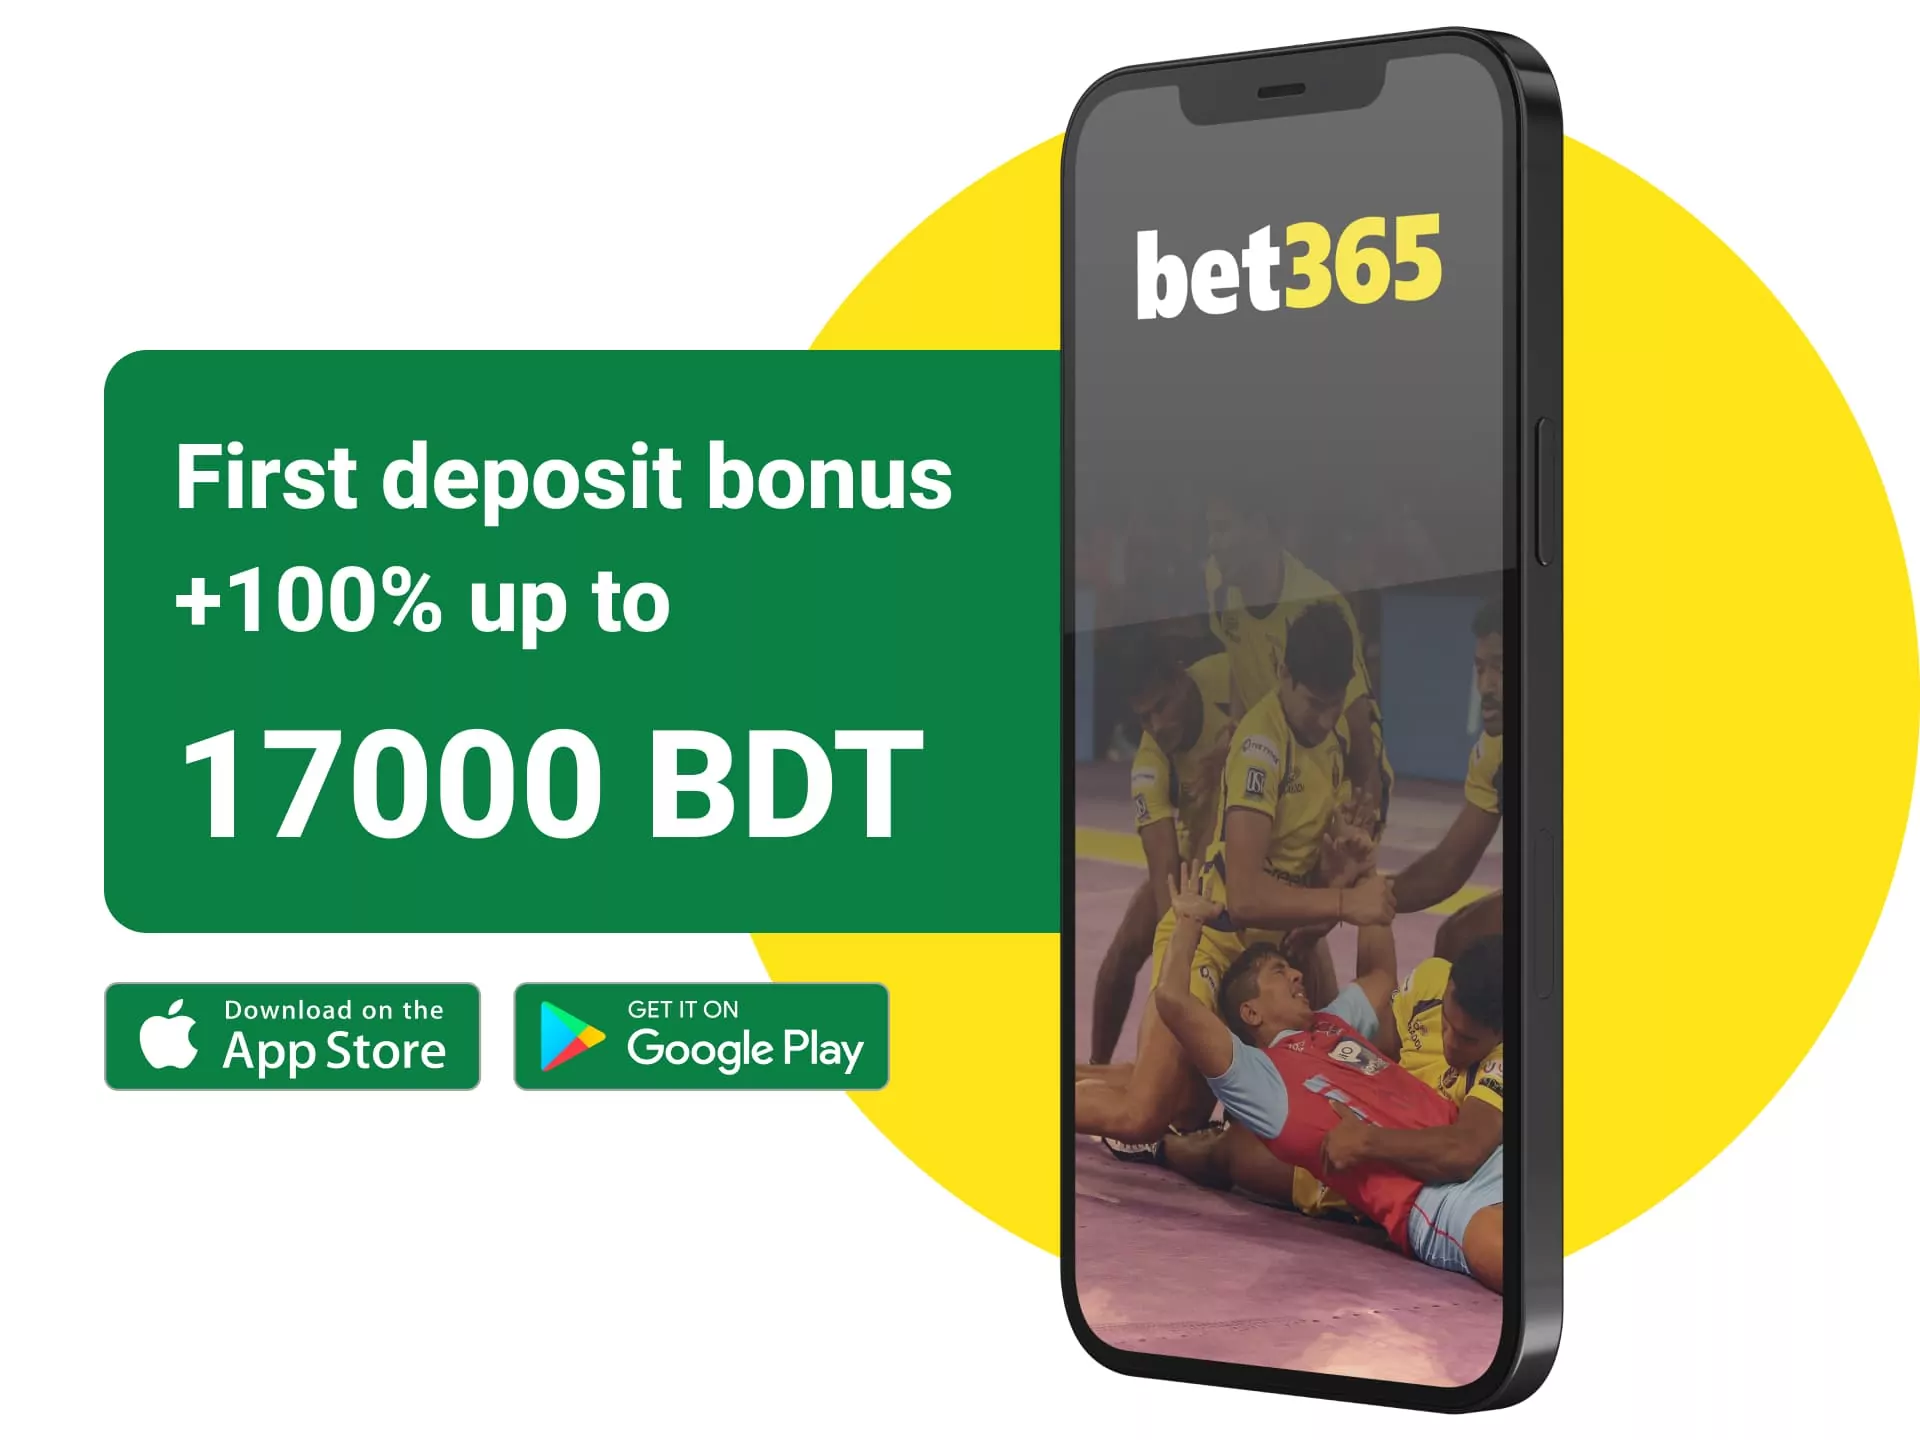 Bet365 betting site with loyalty program and welcome bonus up to 17,000 BDT.